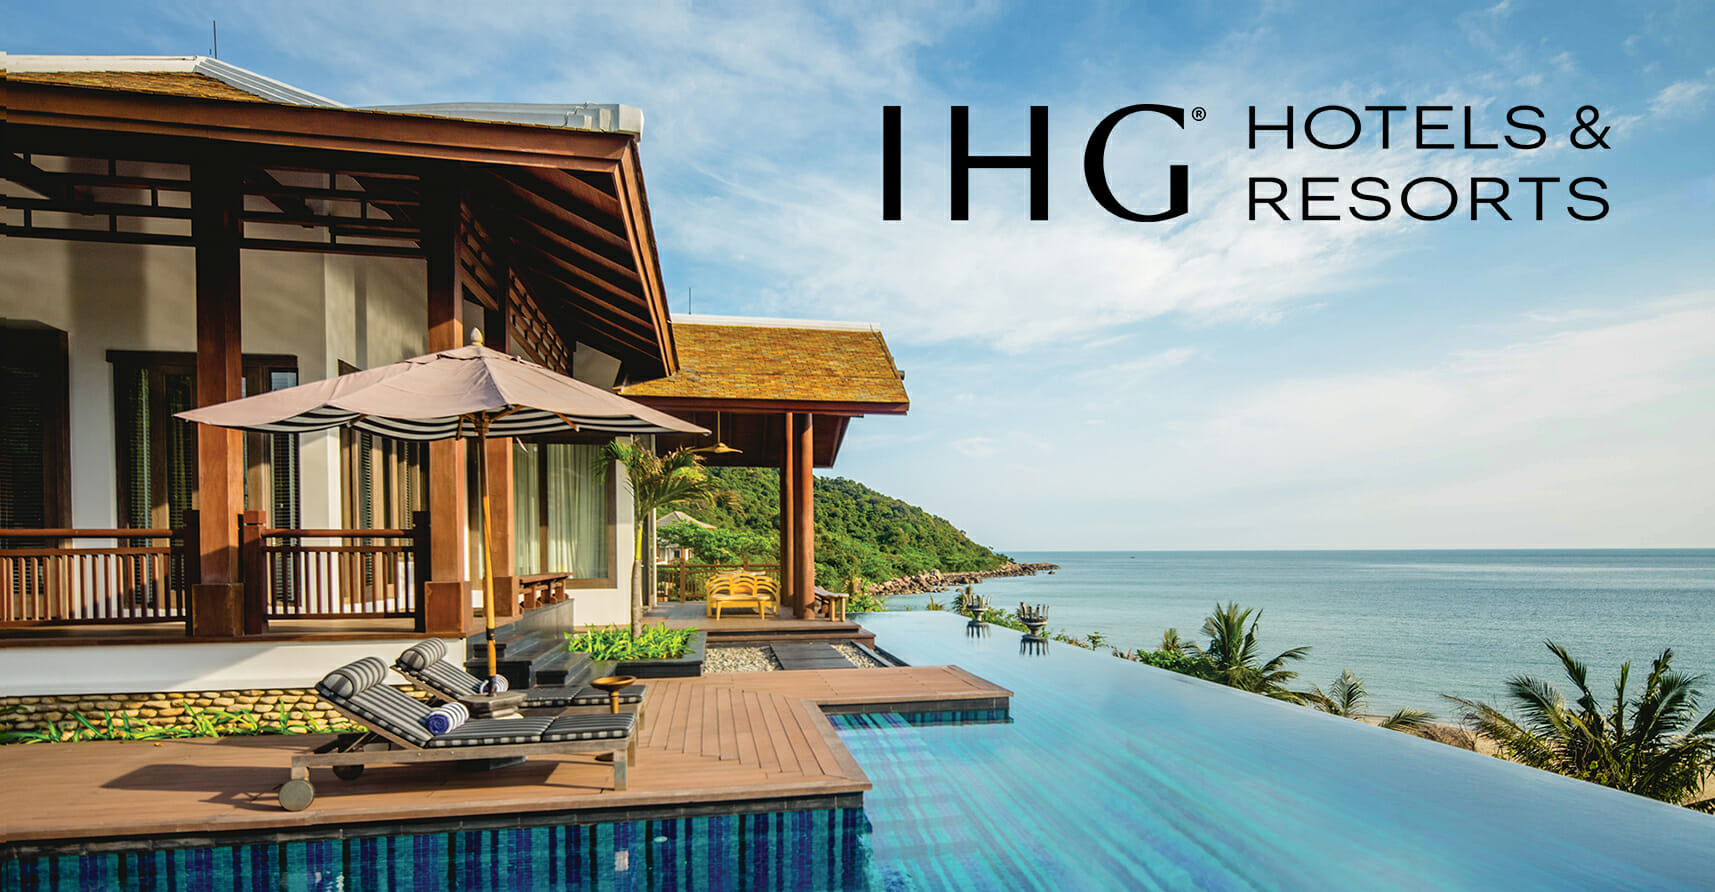 IHG Hotels & Resorts Expands Luxury And Lifestyle Presence In Italy